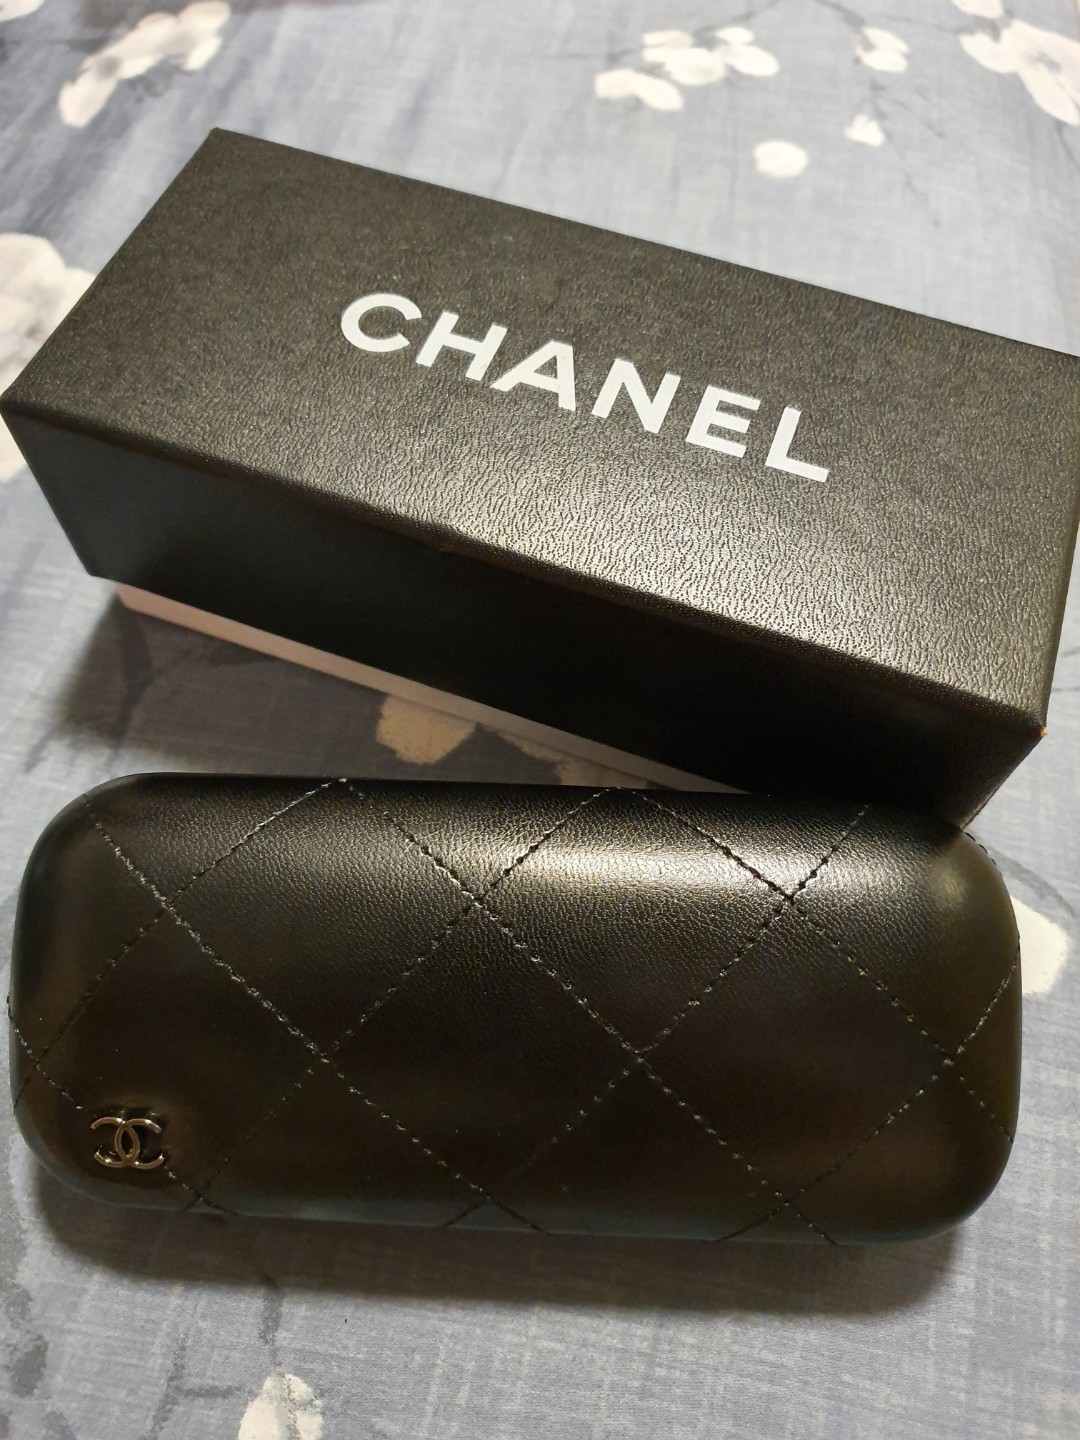 100 AuthenticChanel Sunglasses Case Luxury Accessories on Carousell